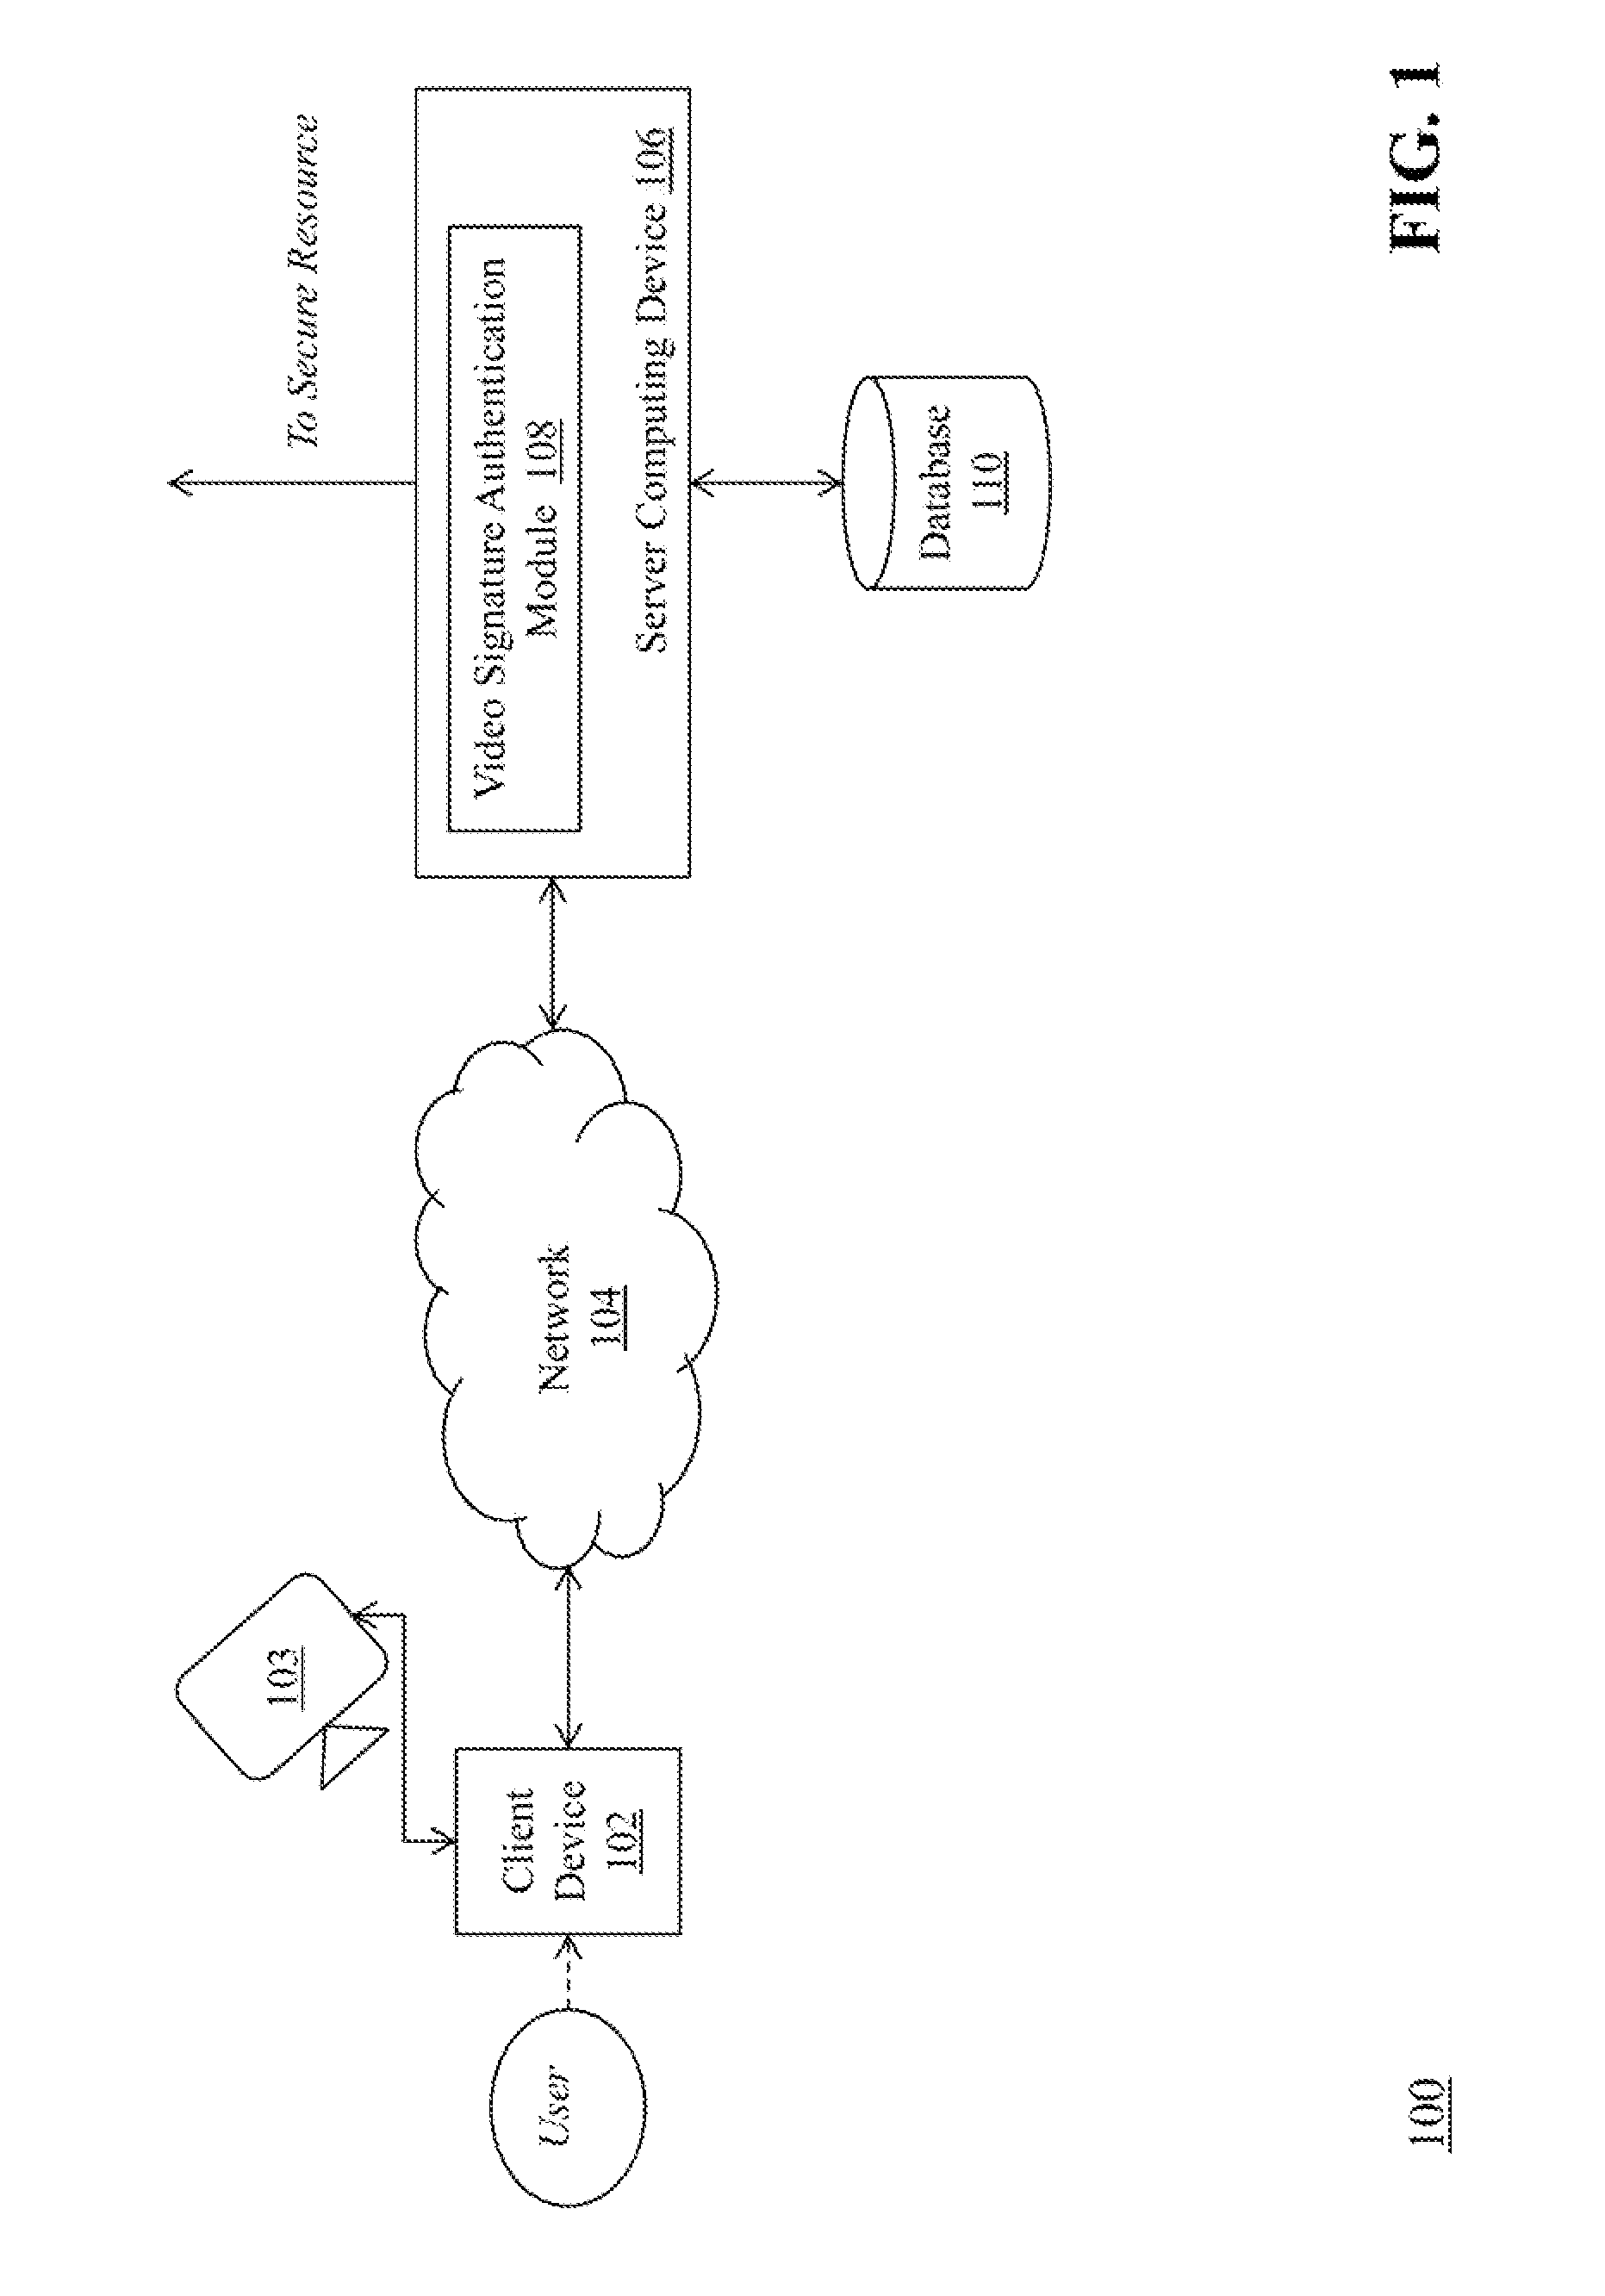 Authentication using a video signature